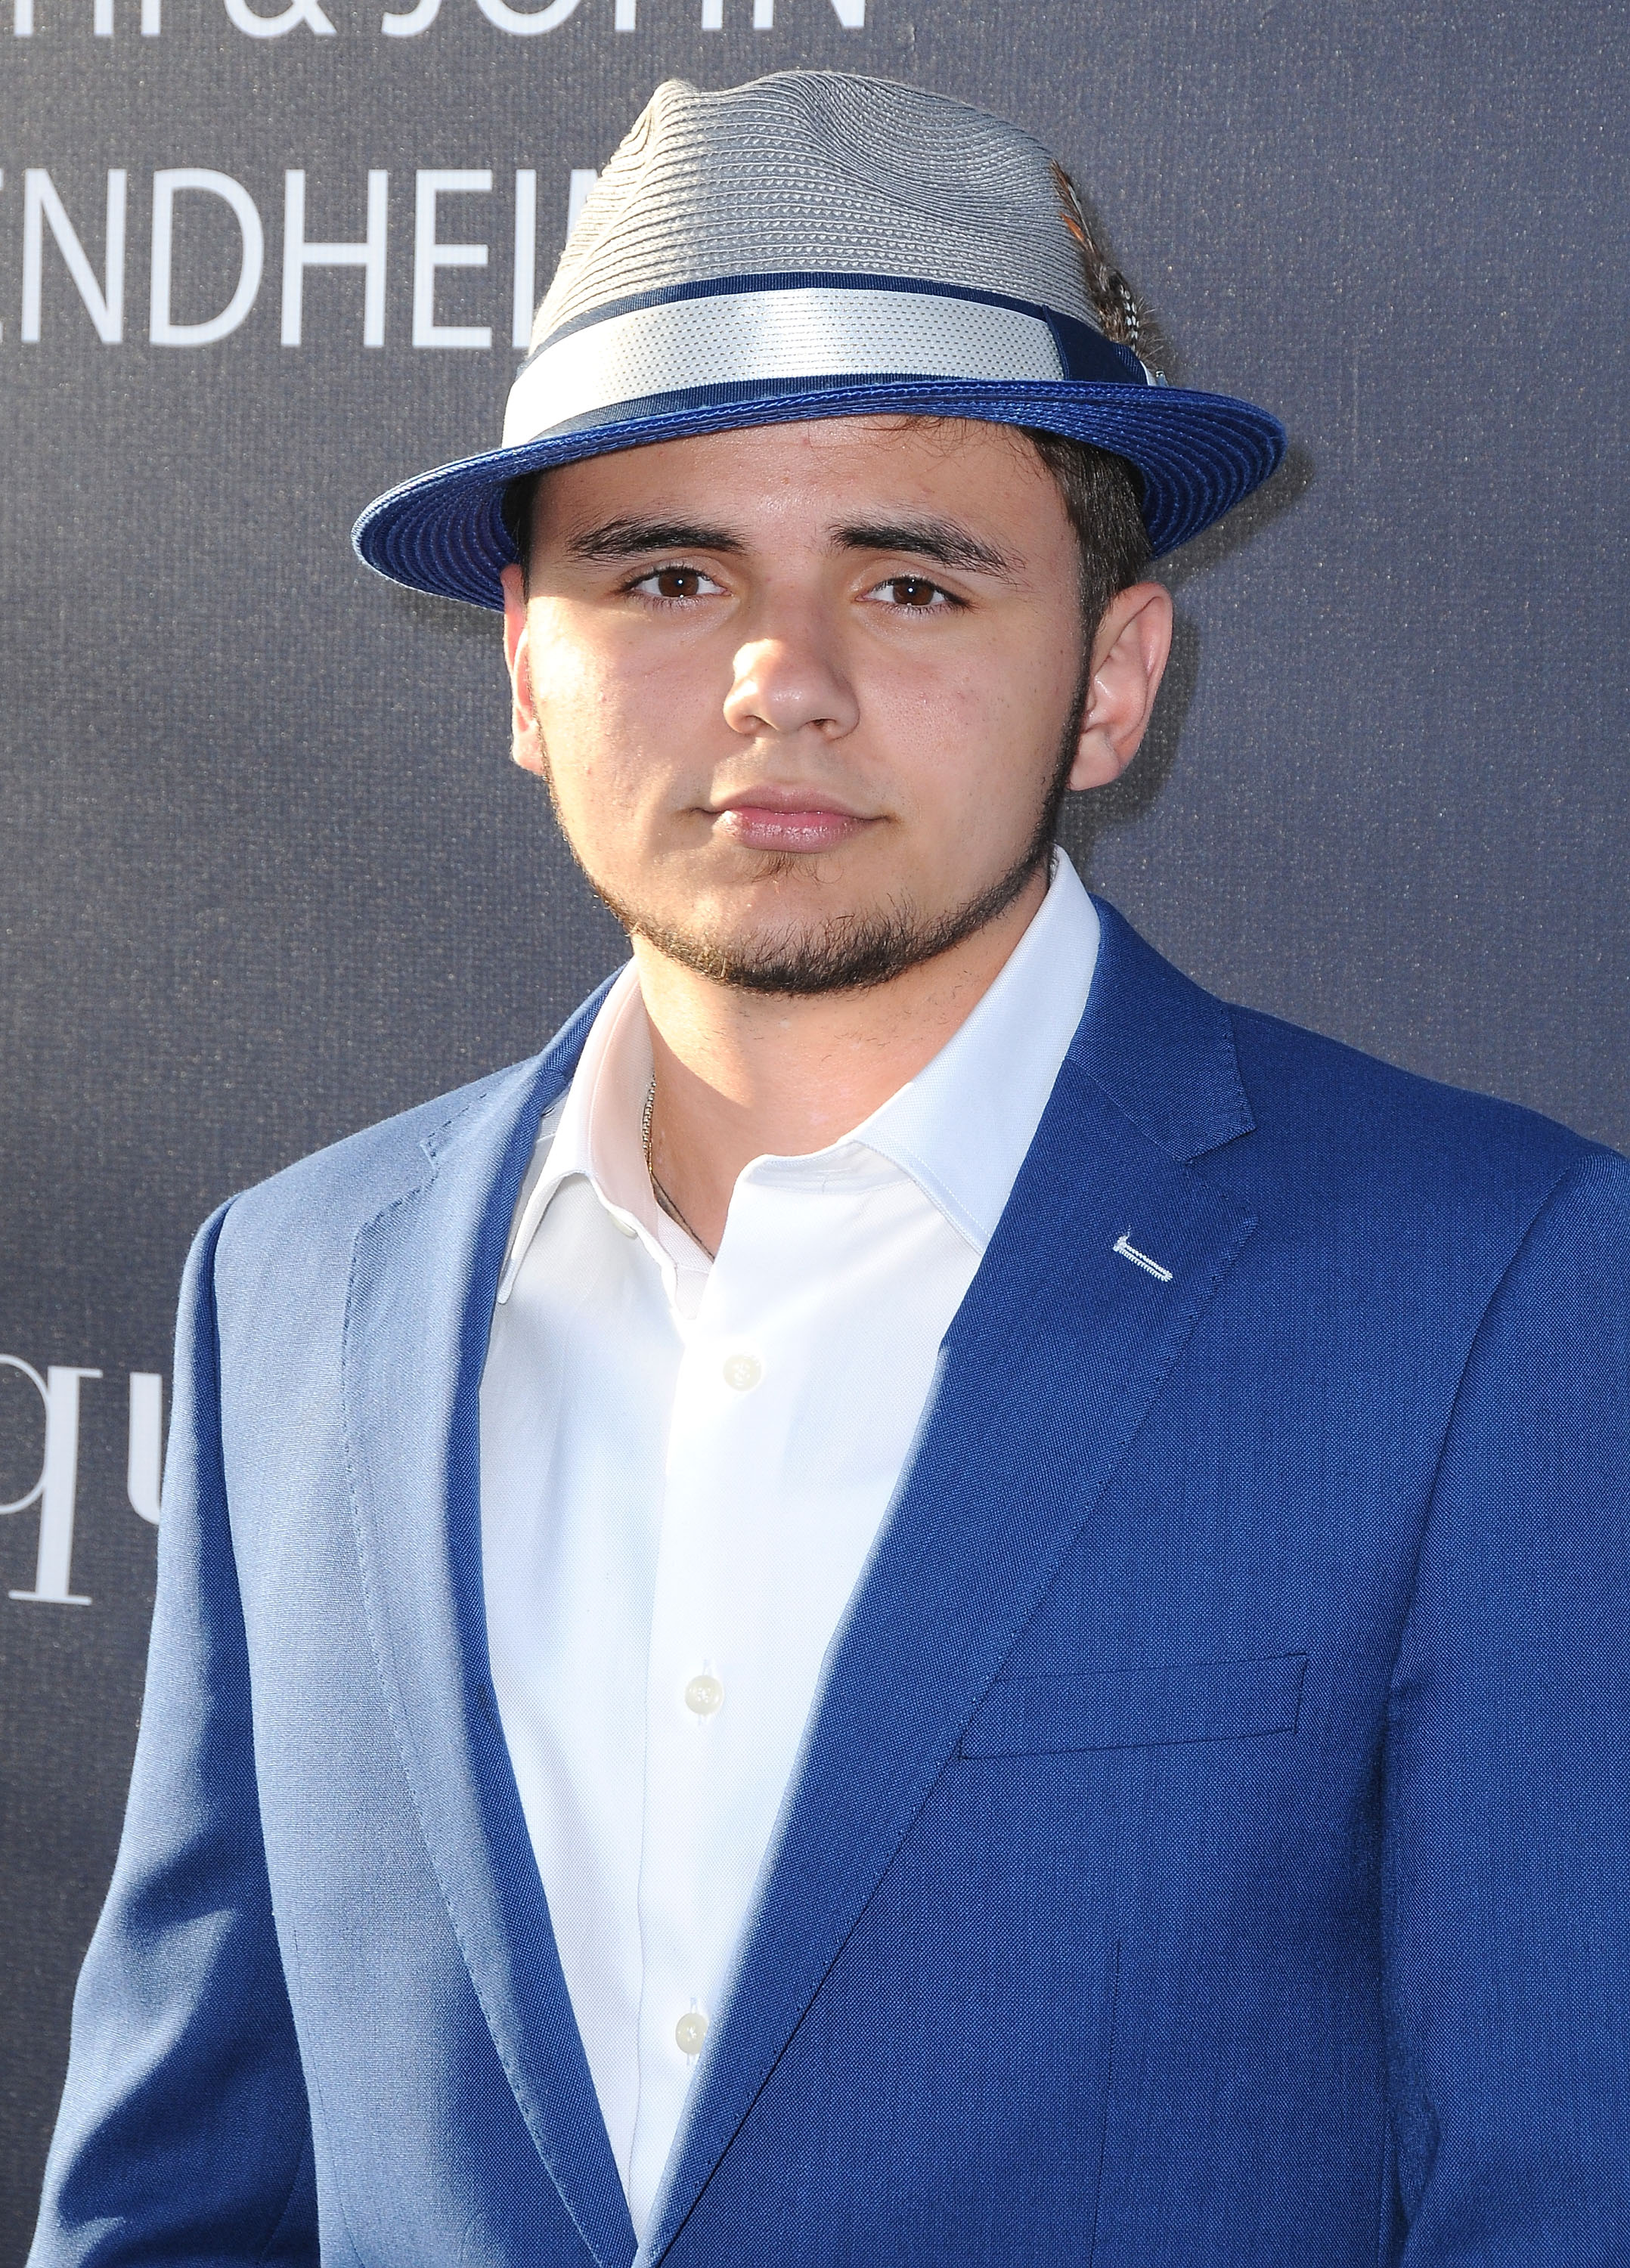 Prince Jackson attends Los Angeles Dodgers Foundation's 3rd Annual Blue Diamond Gala at Dodger Stadium on June 8, 2017, in Los Angeles, California. | Source: Getty Images.